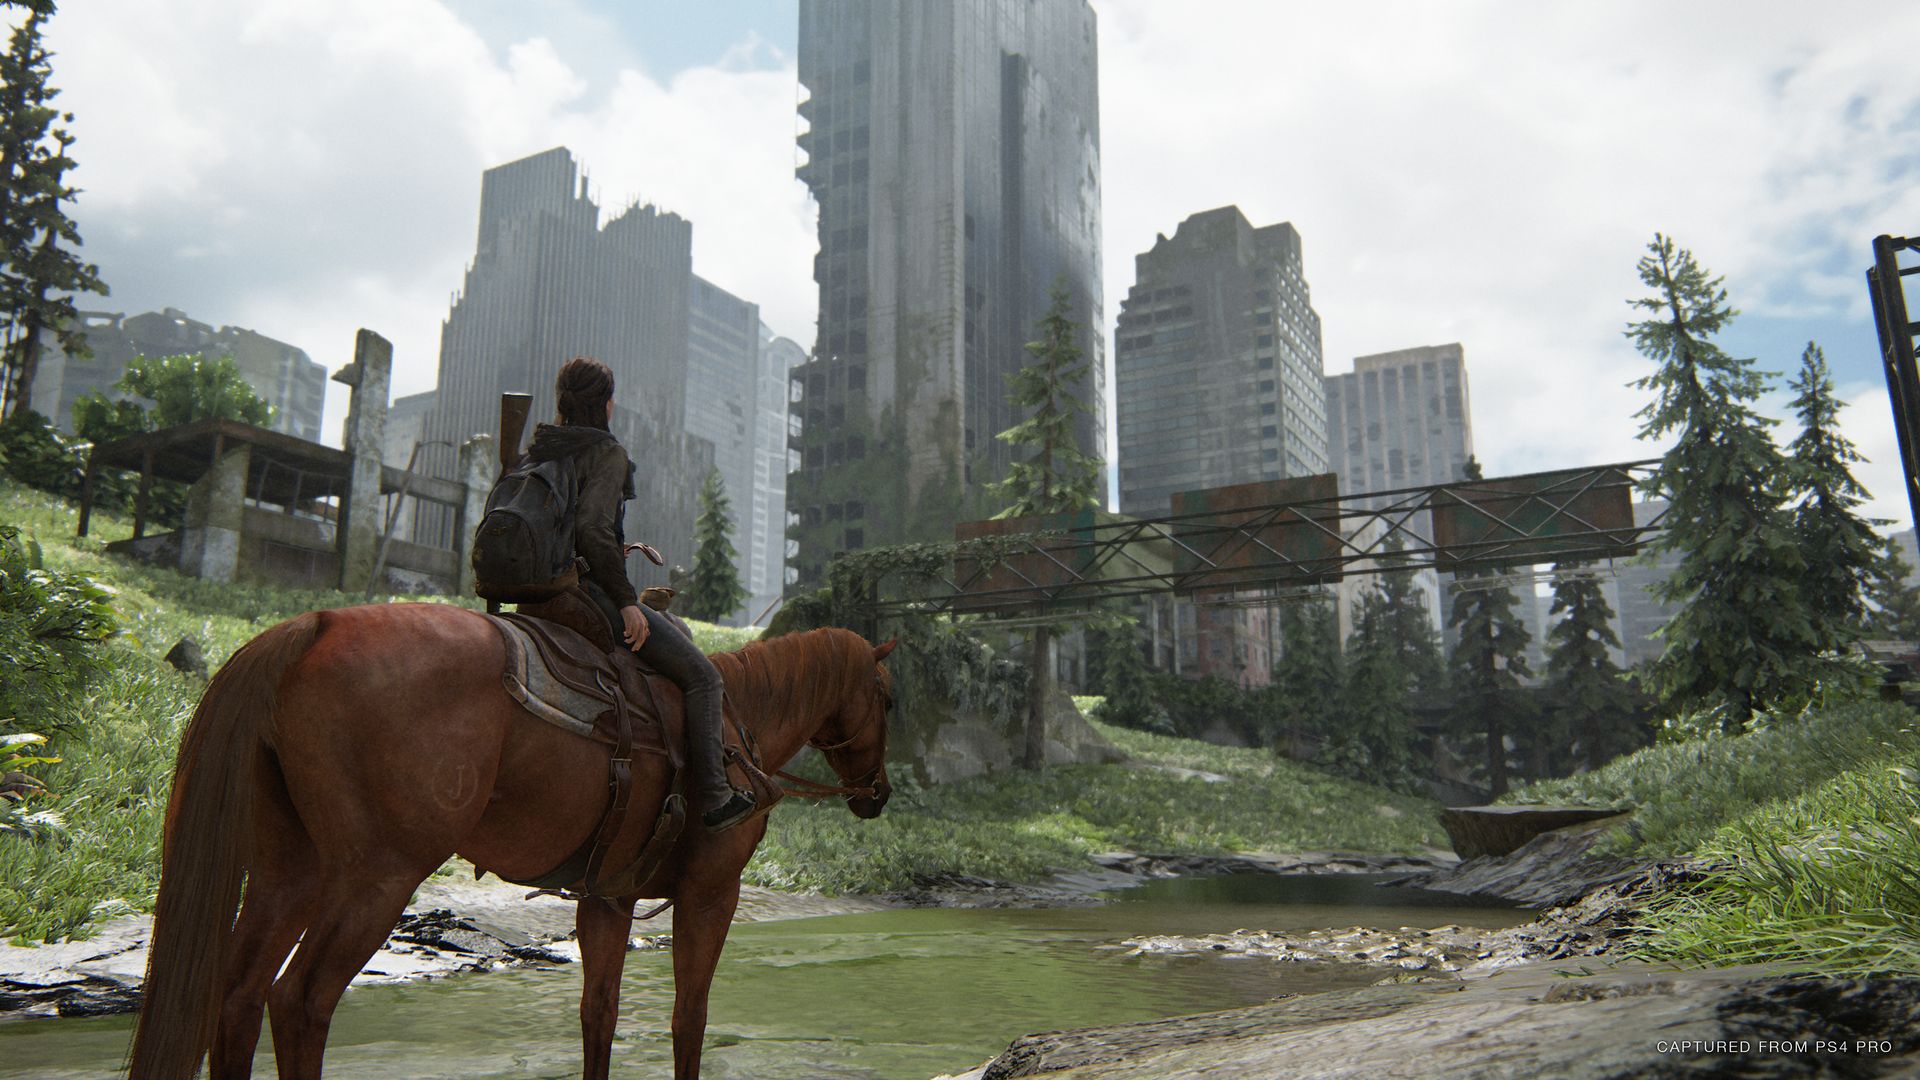 A screenshot of the video game "The Last of Us Part II," depicting player character Ellie riding a horse and overlooking an abandoned city.